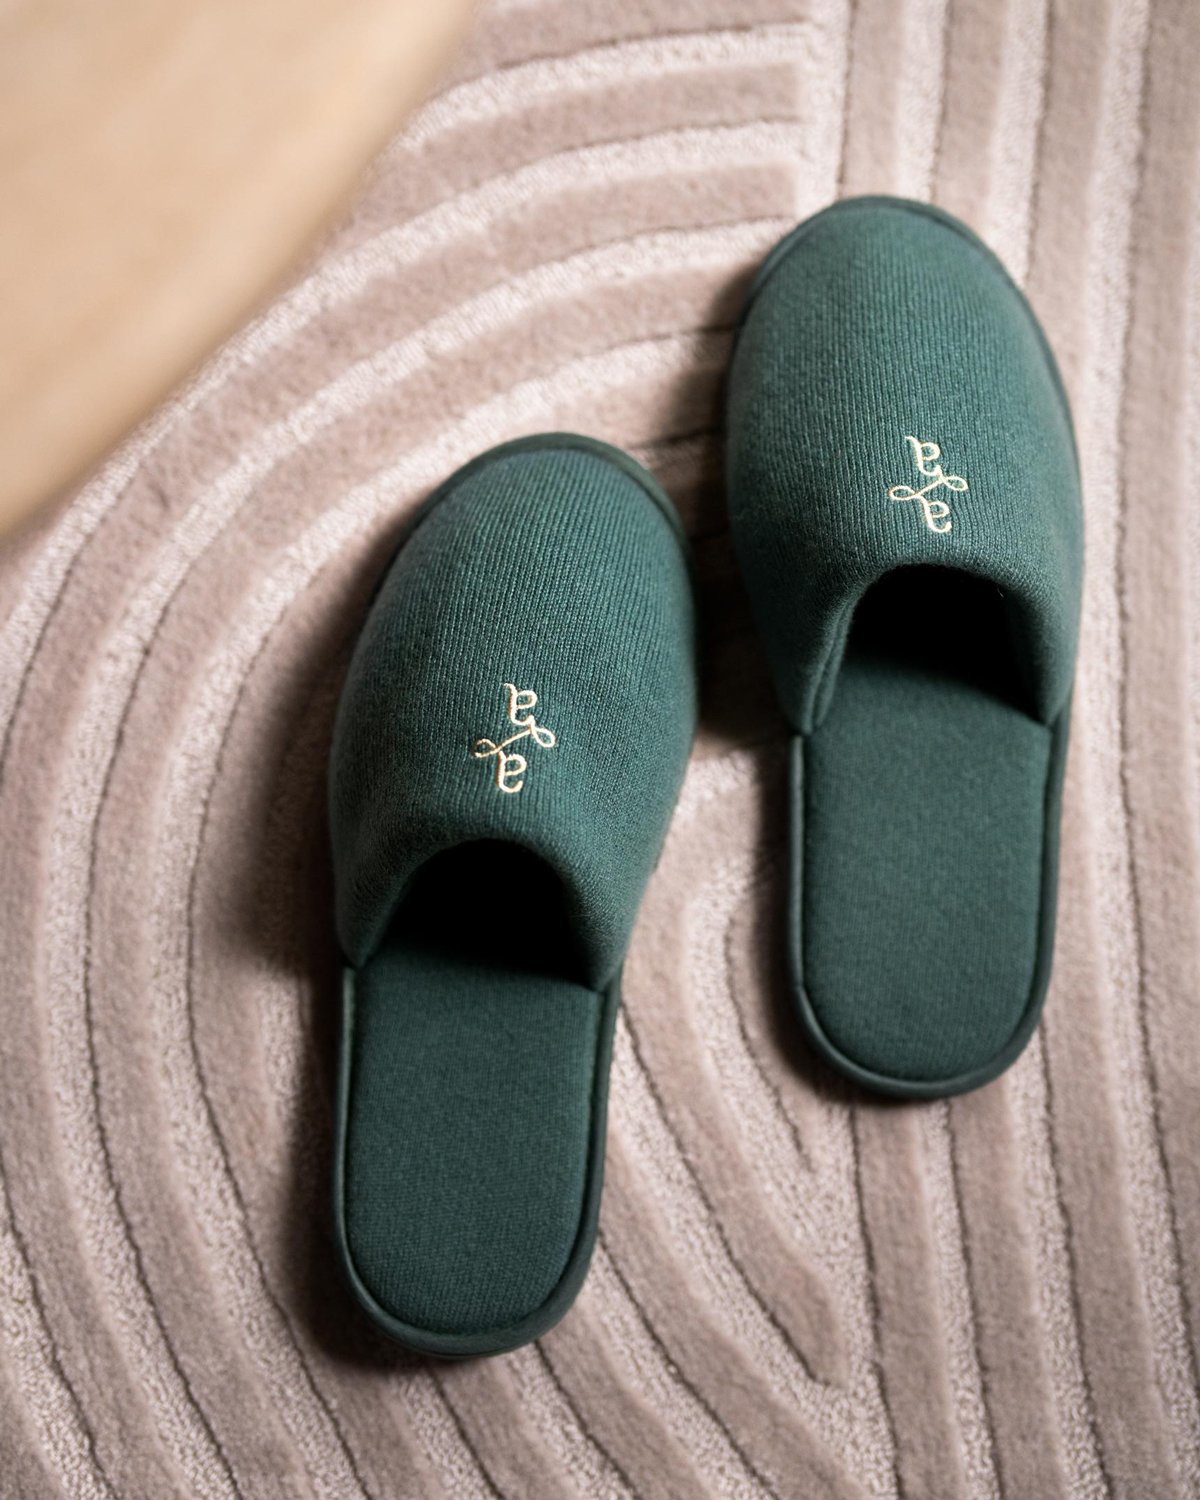 Branded merchandise carefully made for Atria, including comfortable monogrammed green teal slippers on a cozy and soft grey carpeted floor